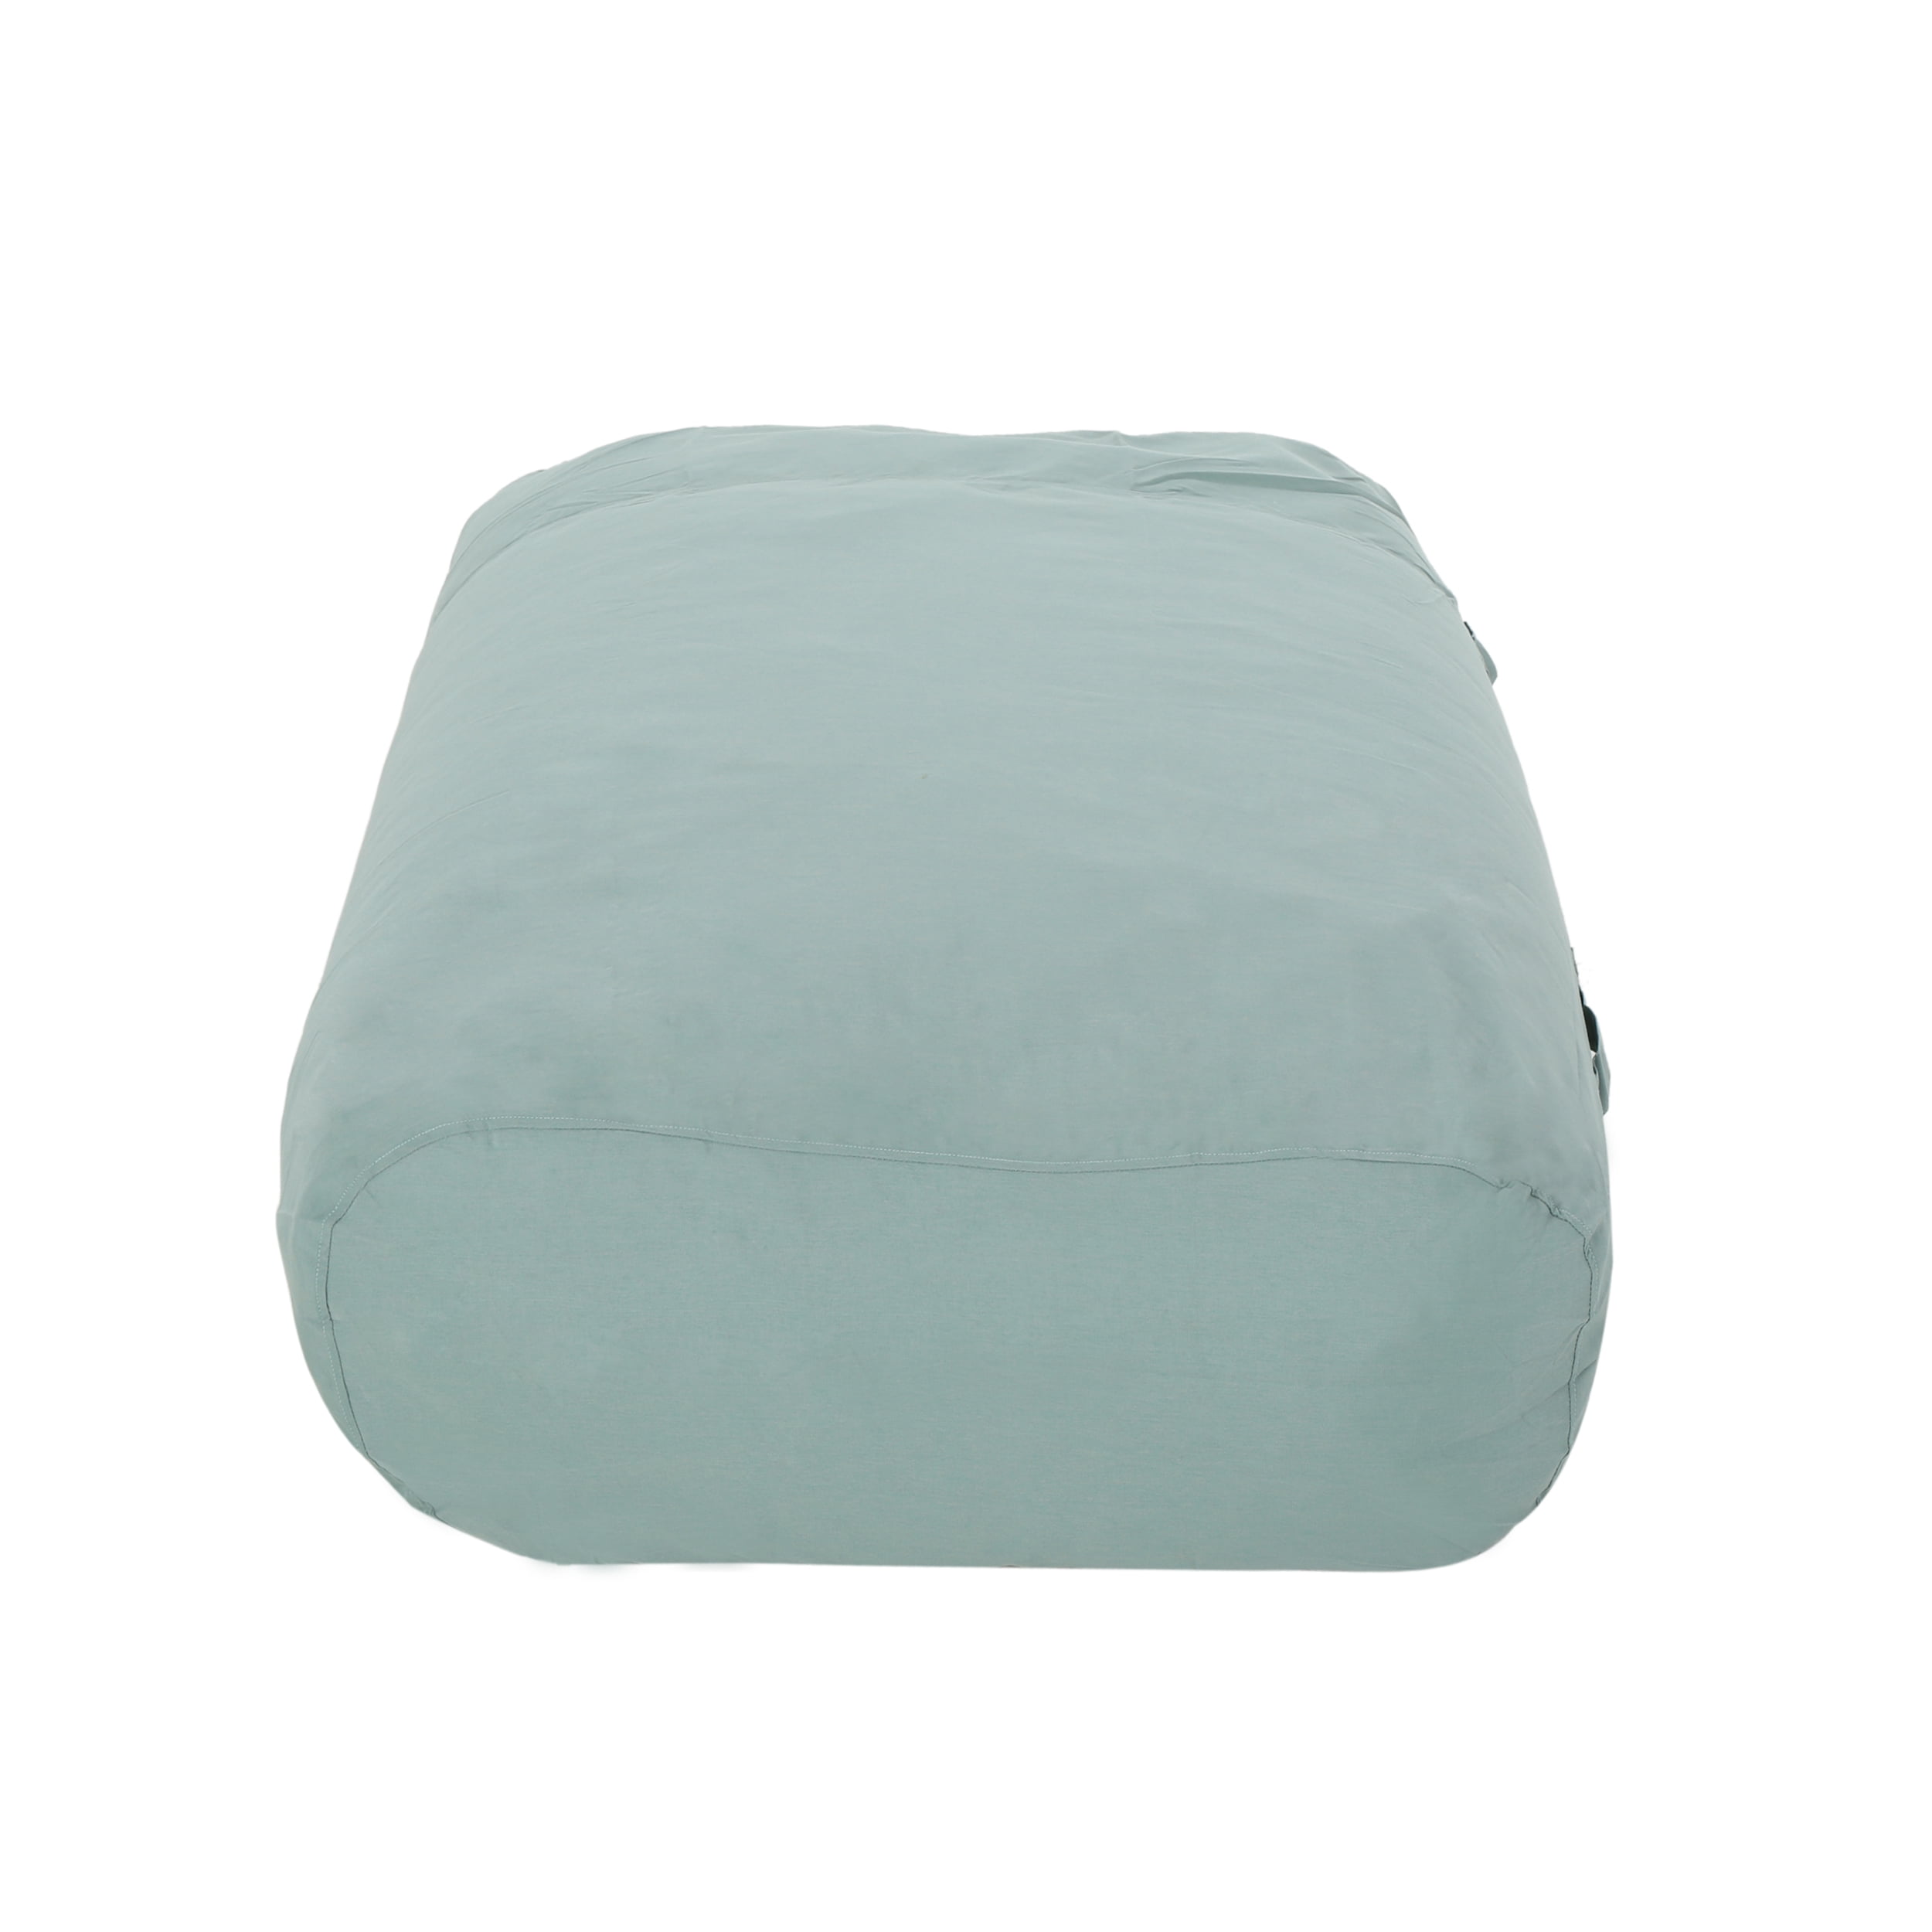 Noble House Picabo Sea Foam Teal 6.5-Foot Bean Bag 94312 - The